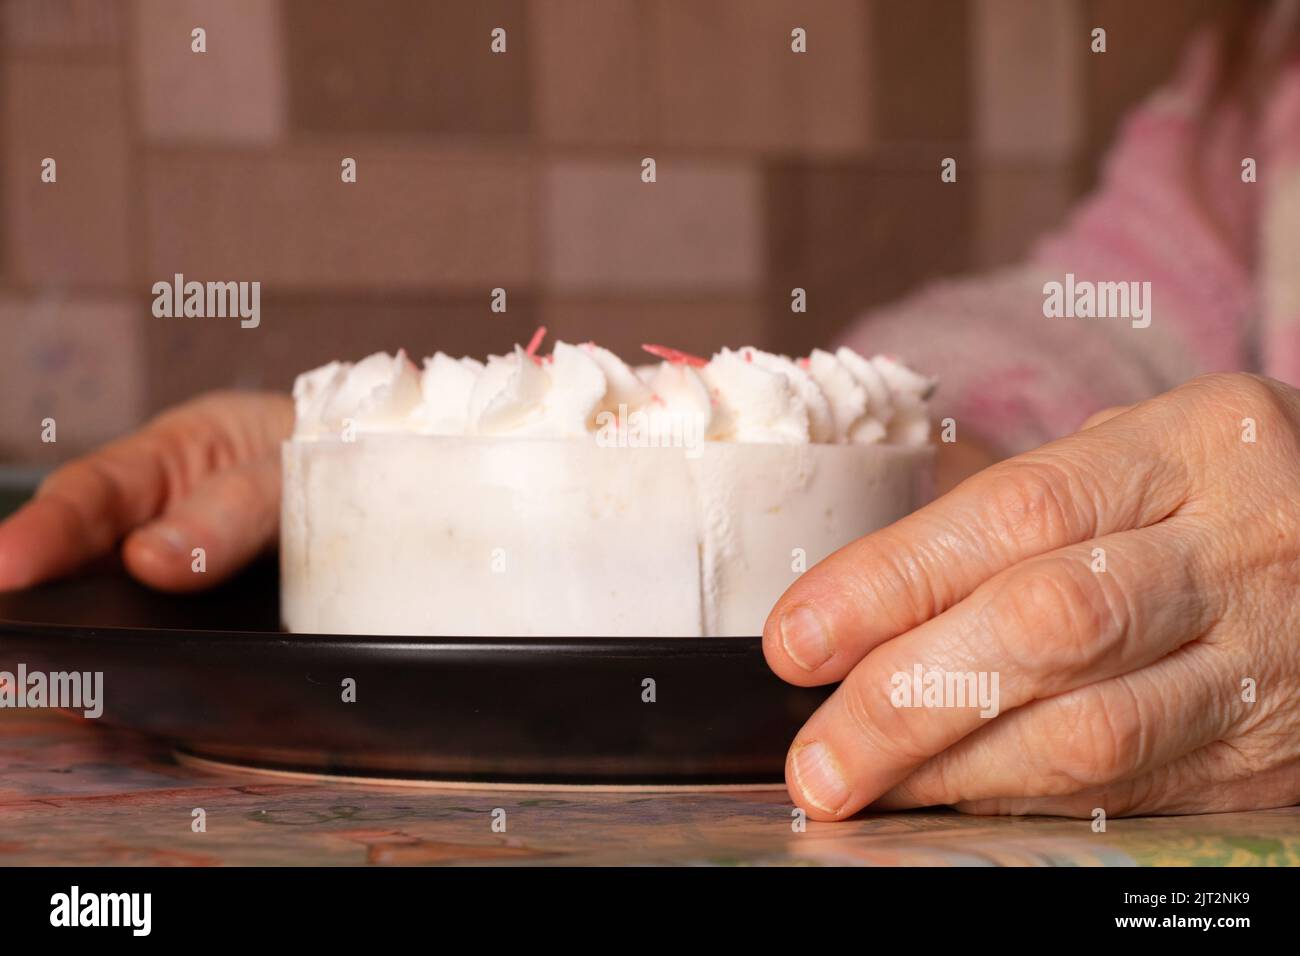 birthday cake on the table at home and mom's hands, holiday birthday, cake Stock Photo